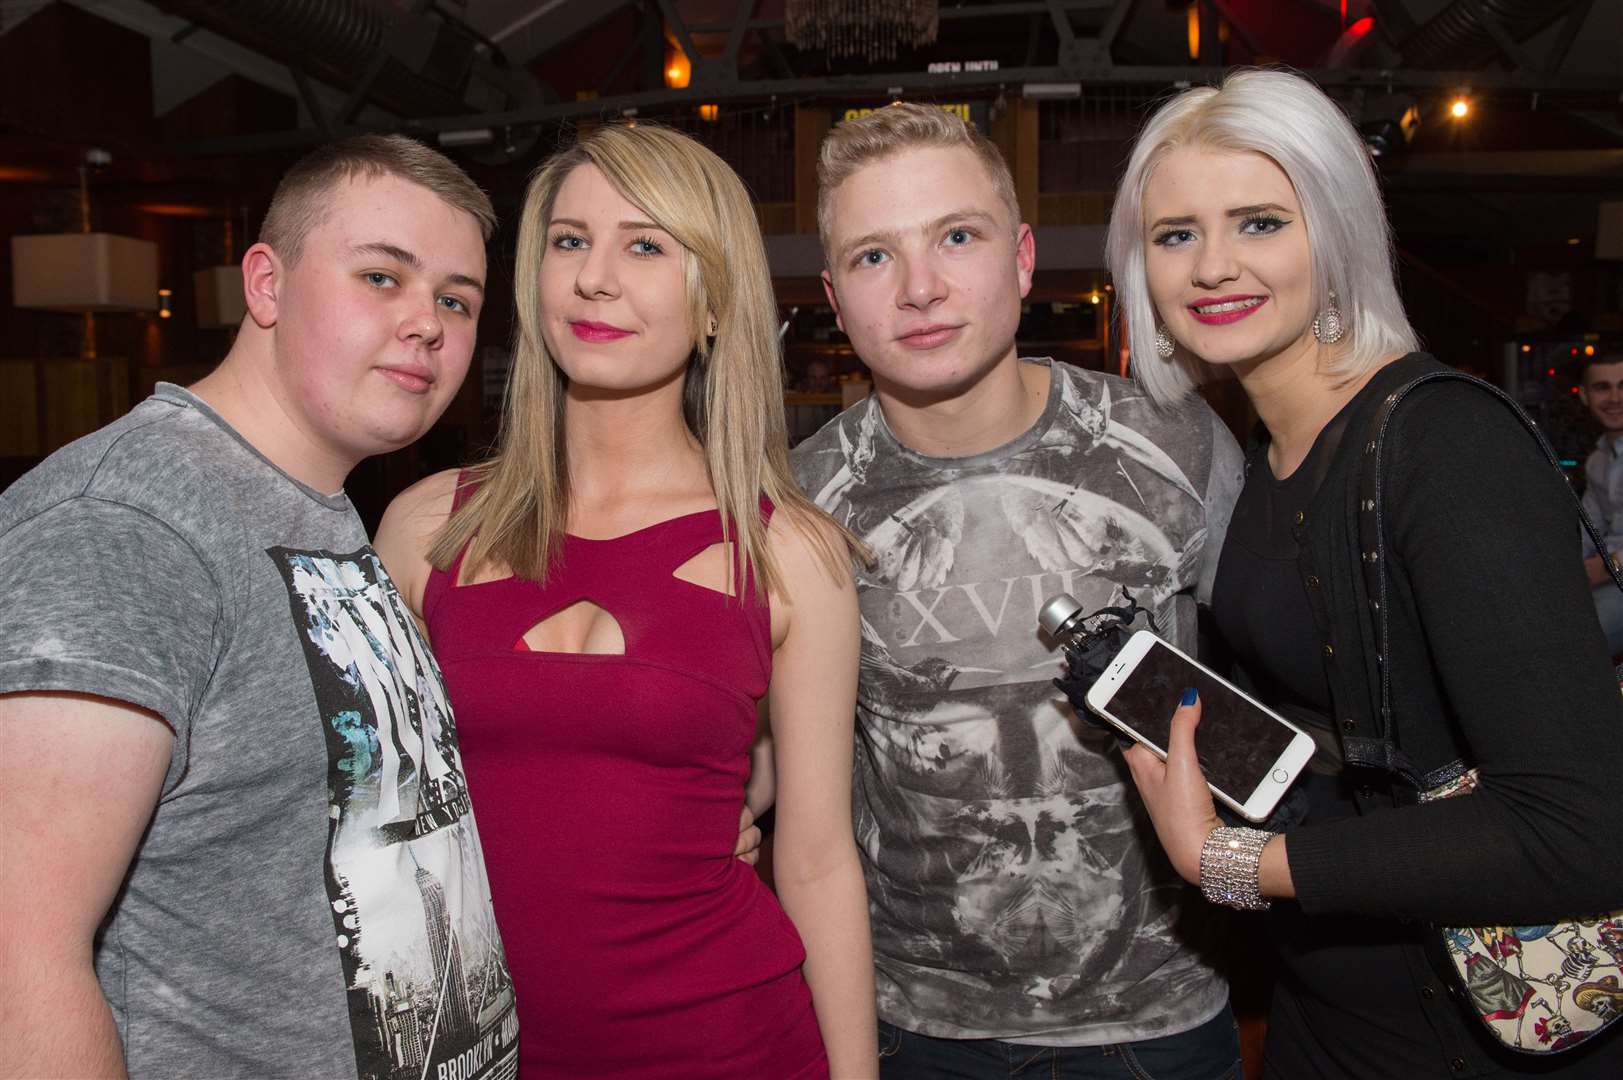 CitySeen 17JAN2015..In Auctioneers to celebrate his 23rd birthday is Craig Seeth (third left) with (left to right) Daniel Bryan, Chloe McMillan and Nadine Macleod...Picture: Callum Mackay. Image No. 027861.